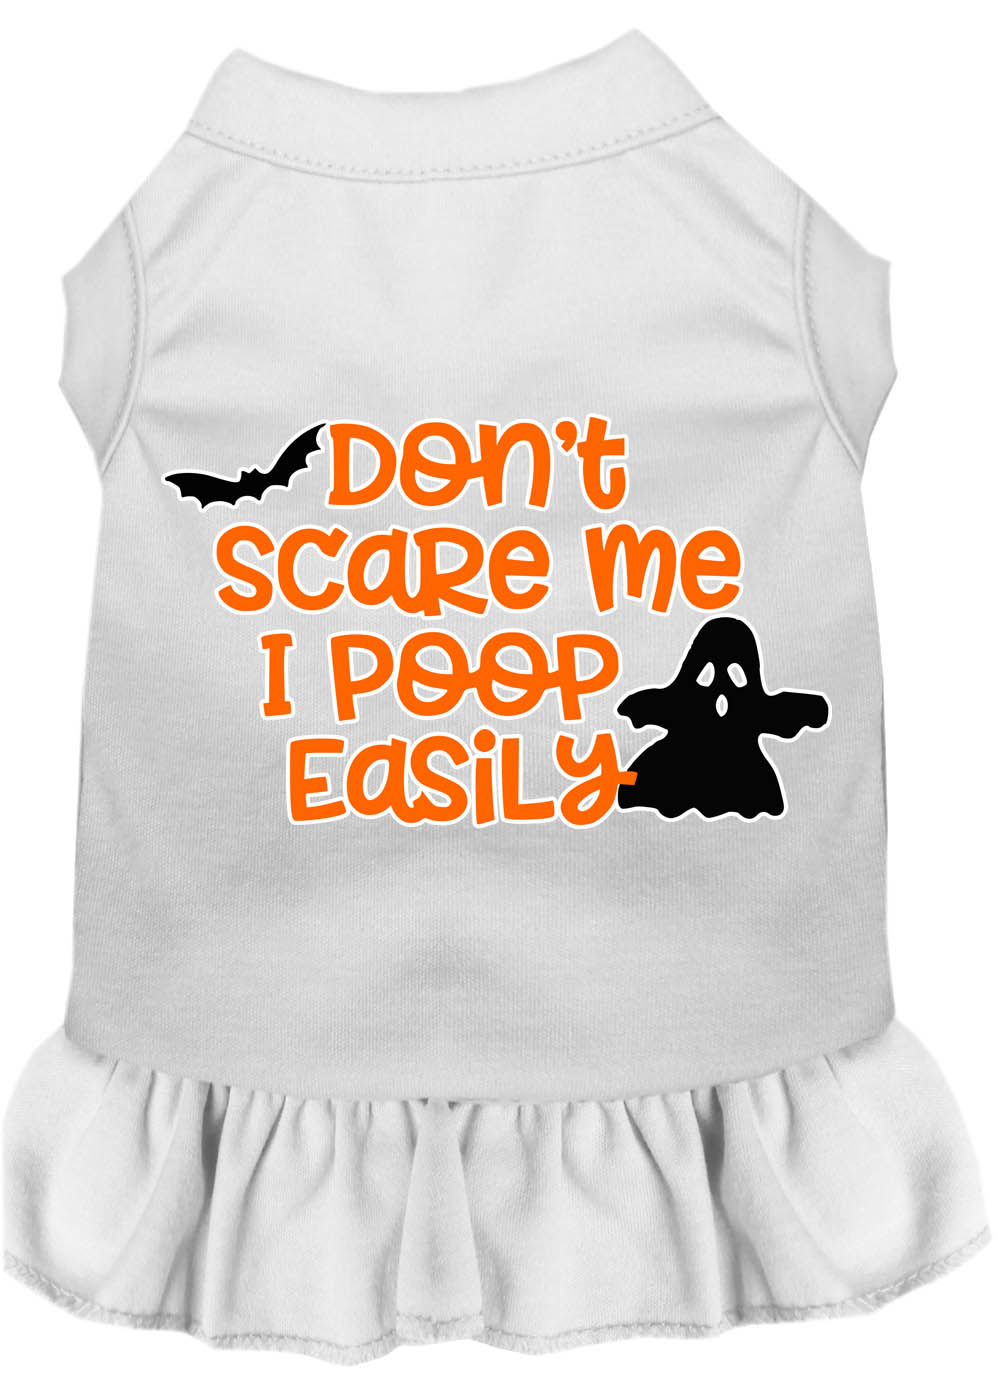 Don't Scare Me, Poops Easily Screen Print Dog Dress White 4X